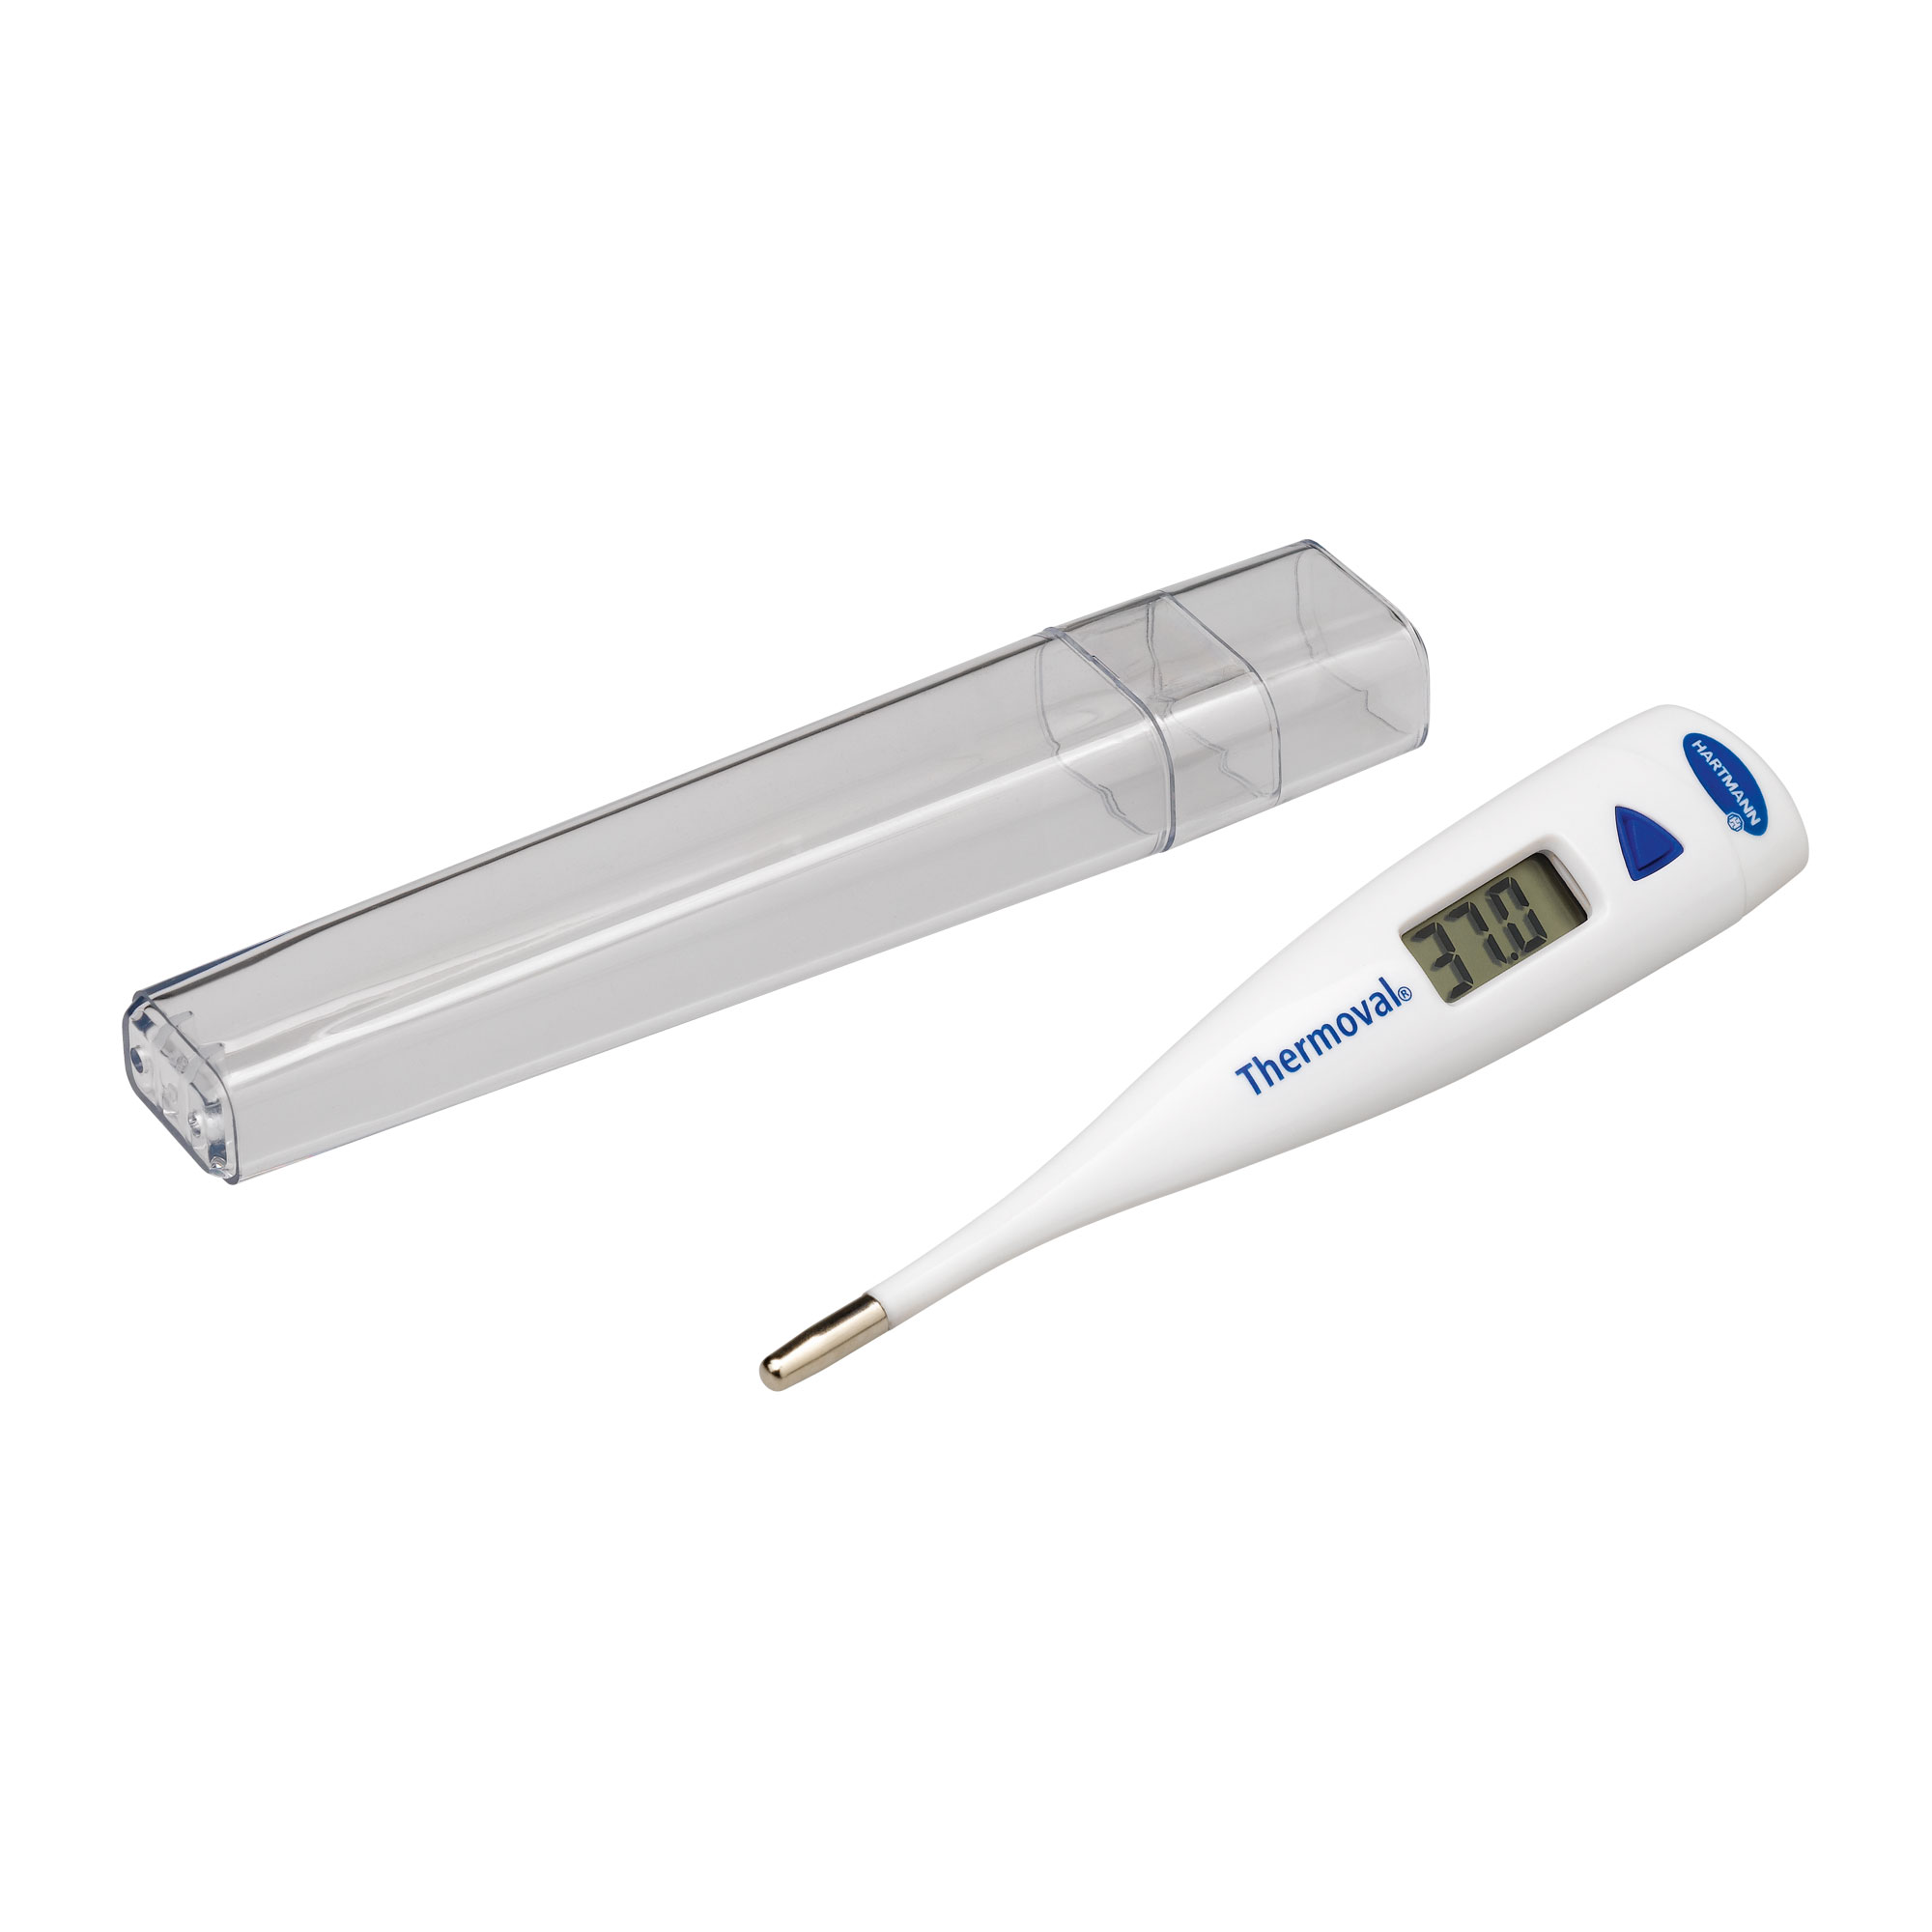 Thermoval digitales Fieberthermometer ohne Umverpackung